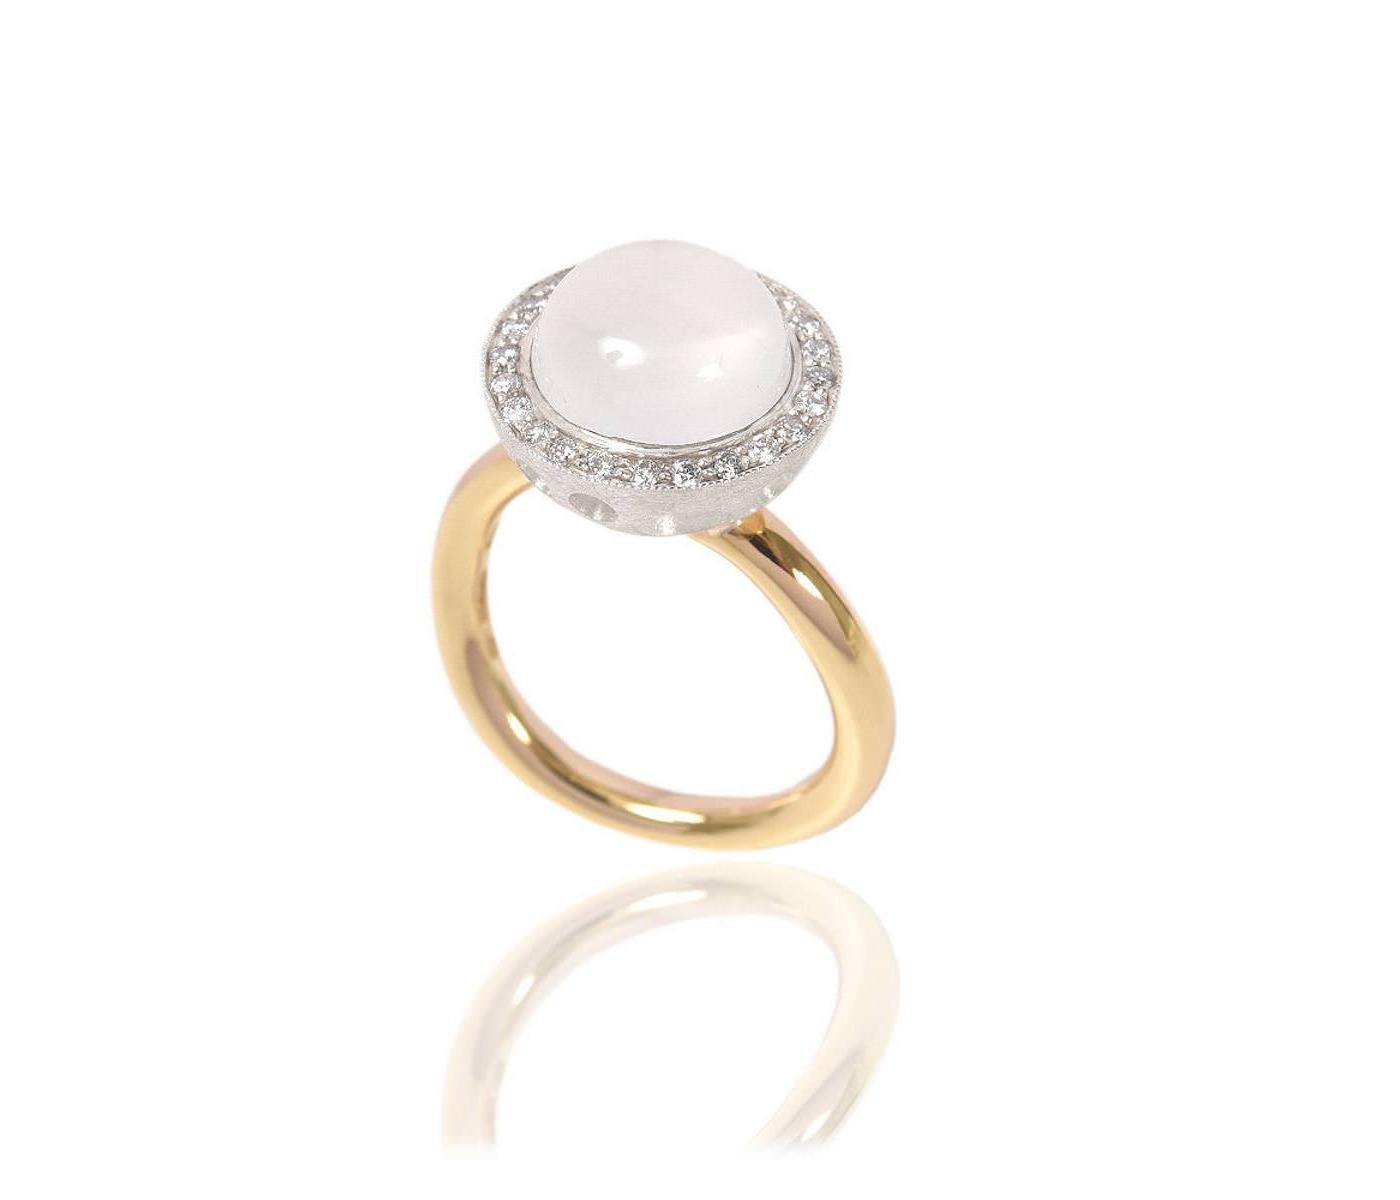 Ring by Muscari